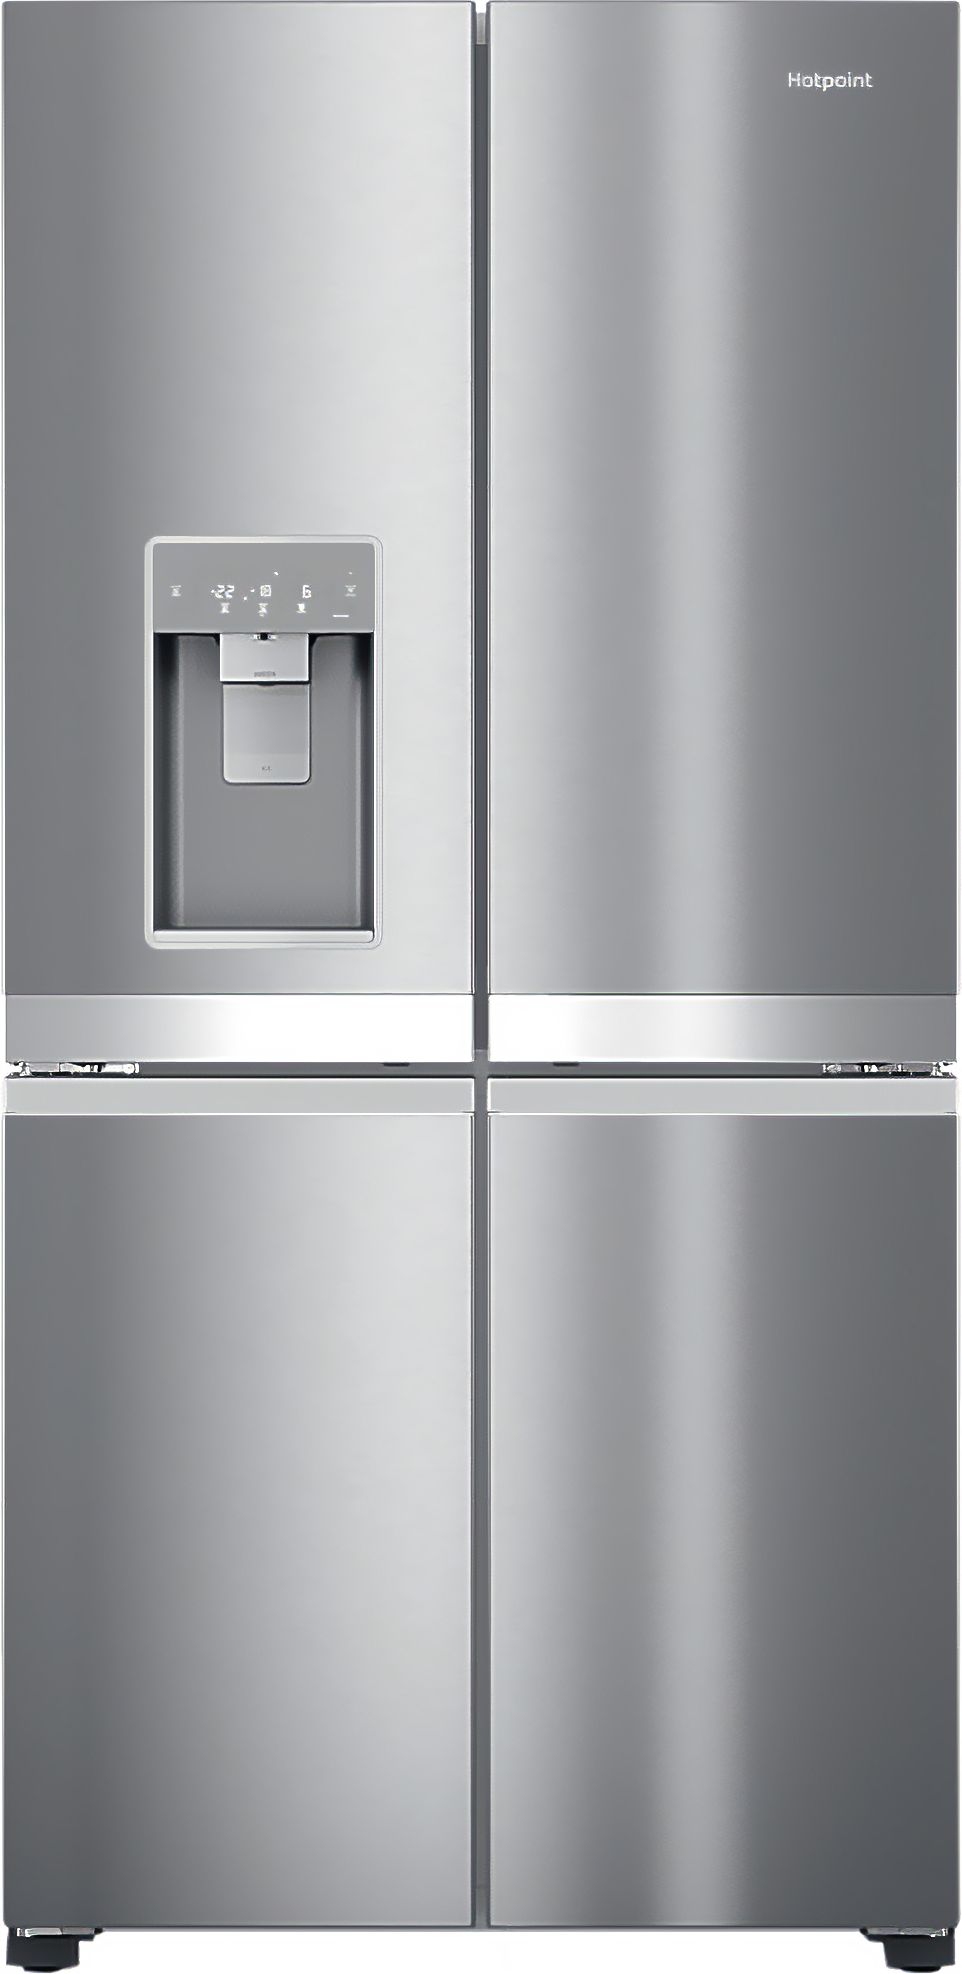 Hotpoint HQ9IMO2LG Plumbed Total No Frost American Fridge Freezer - Stainless Steel - E Rated, Stainless Steel